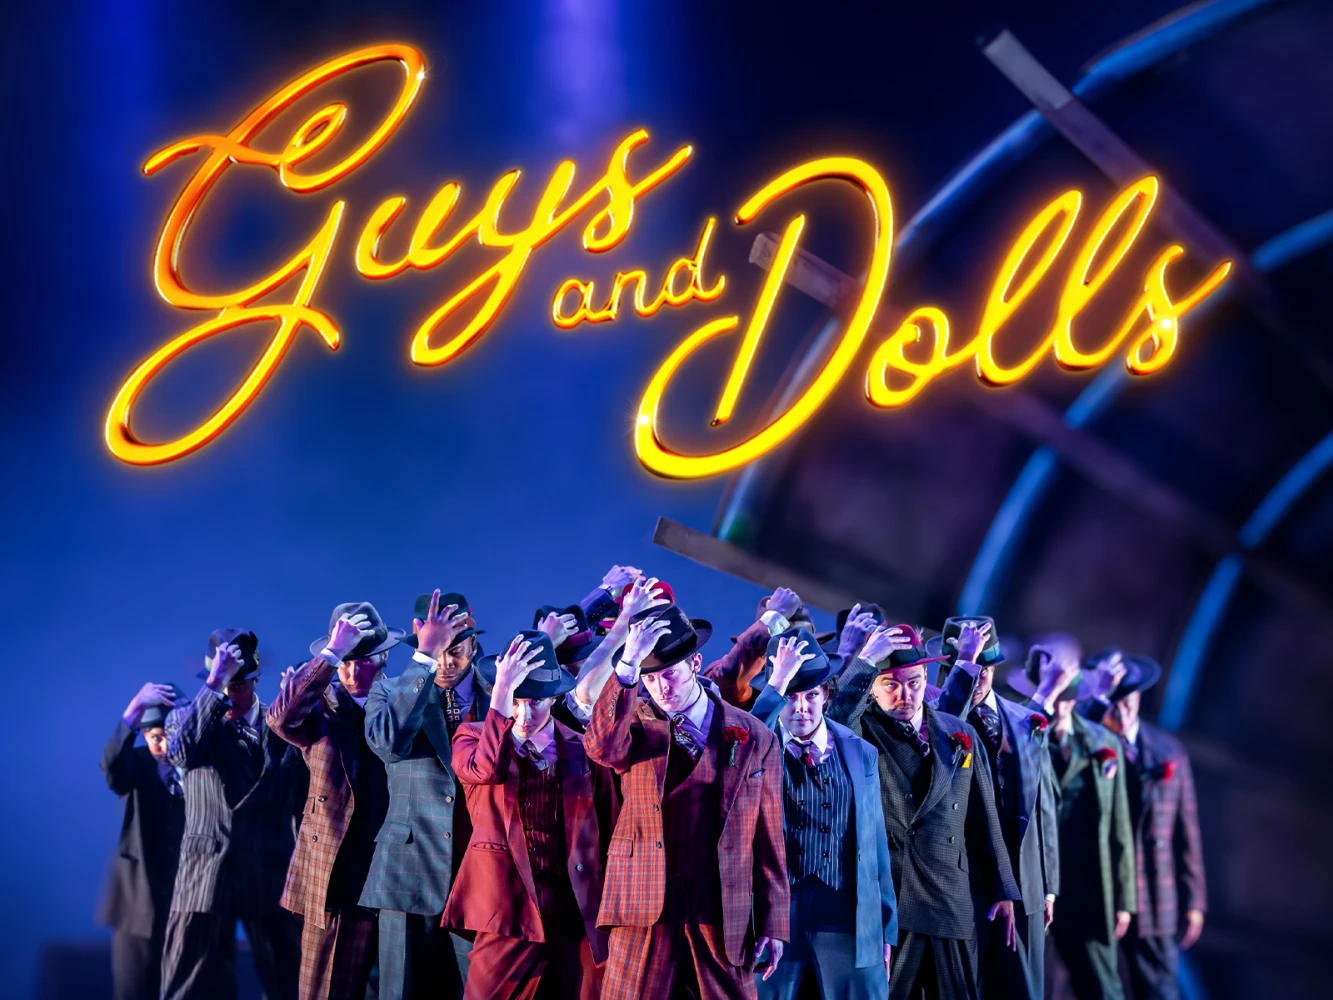 Guys and Dolls: What to expect - 8